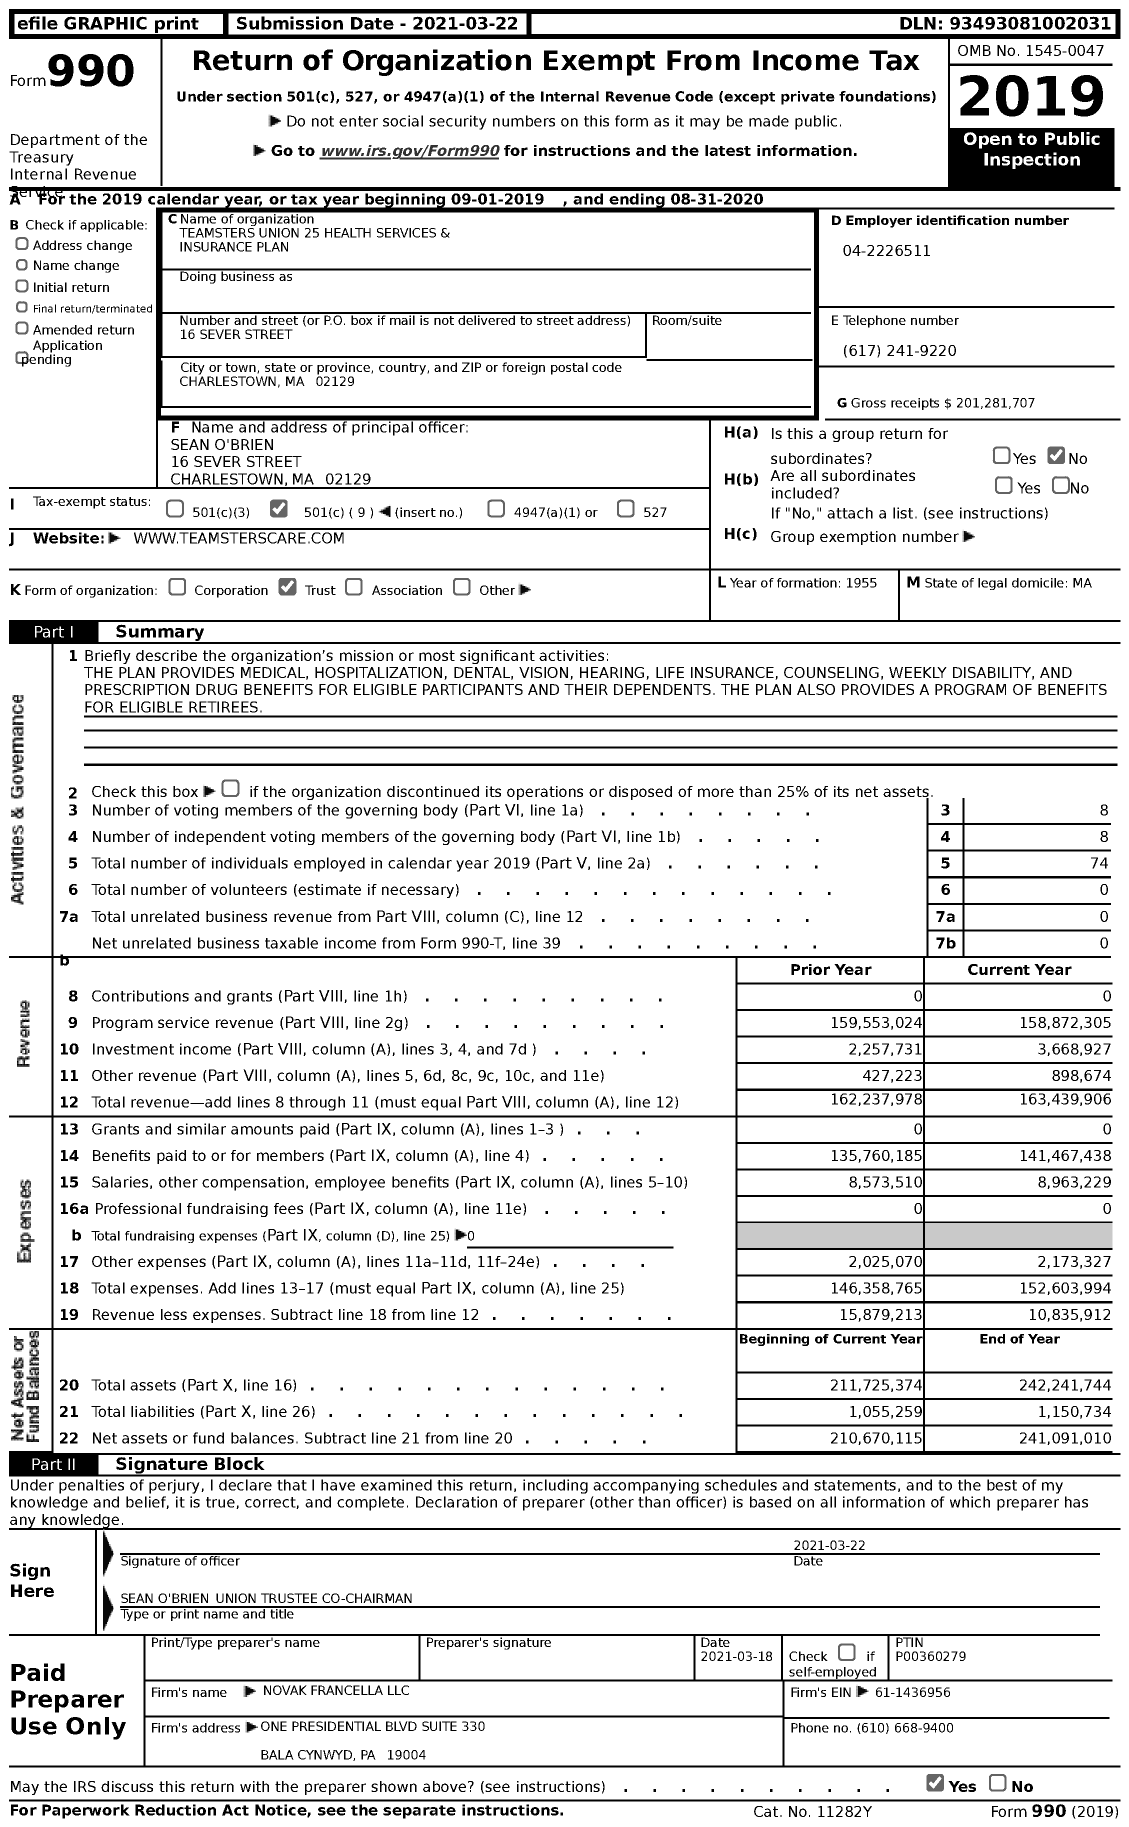 Image of first page of 2019 Form 990 for Teamsters Union Local 25 Health Services and Insurance Plan